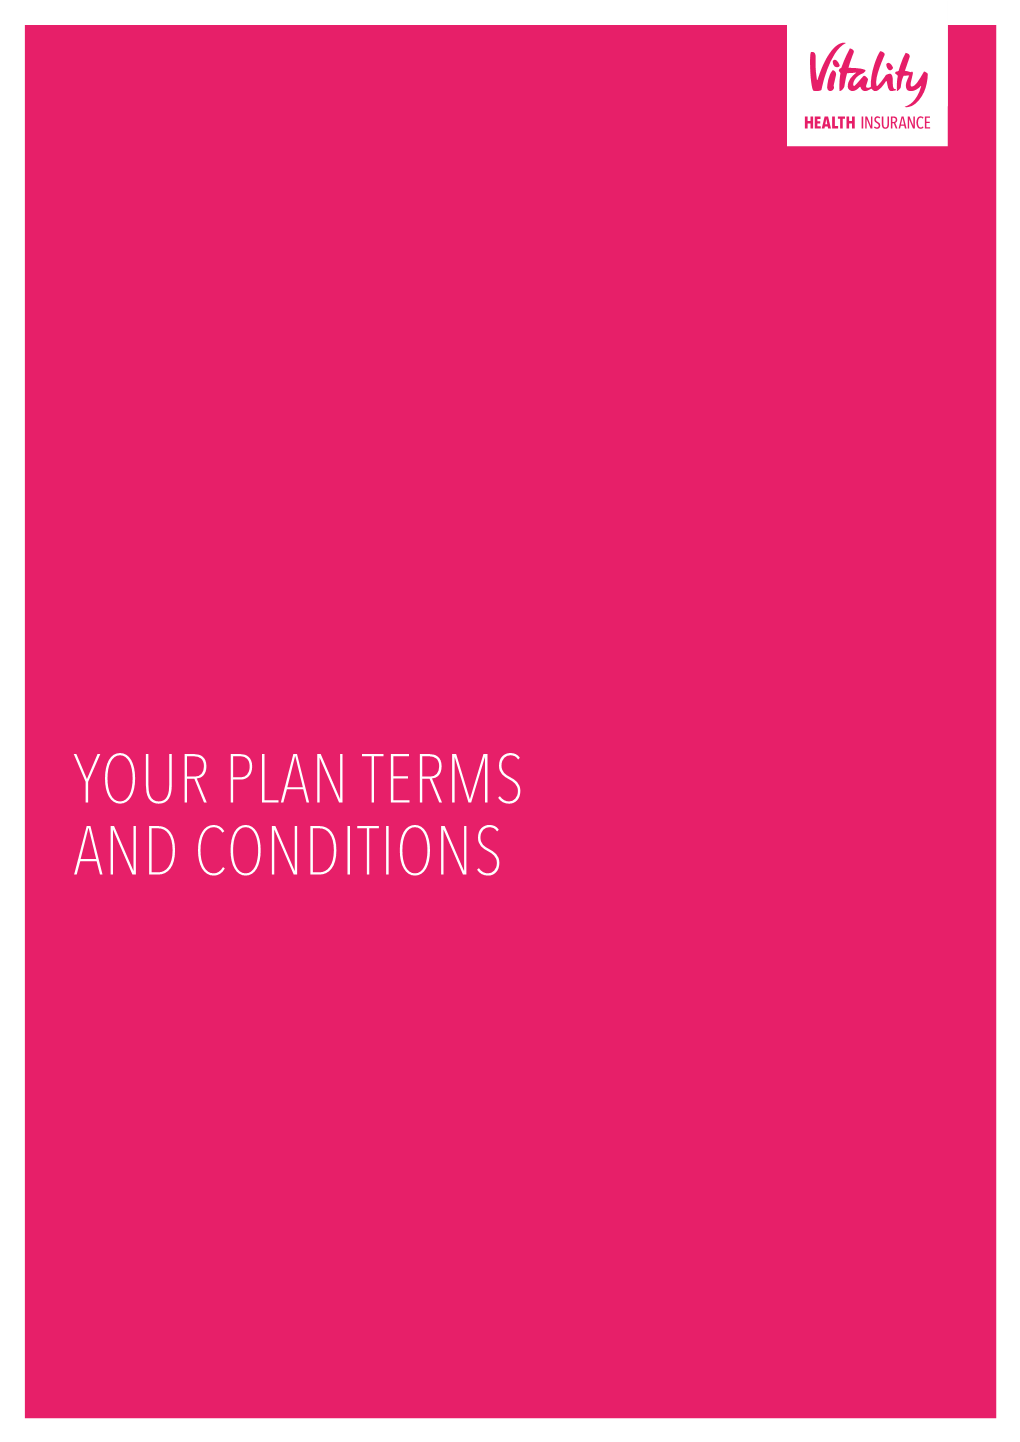 Your Plan Terms and Conditions If You Ever Need to Make a Claim, You Can Do So One of Three Ways